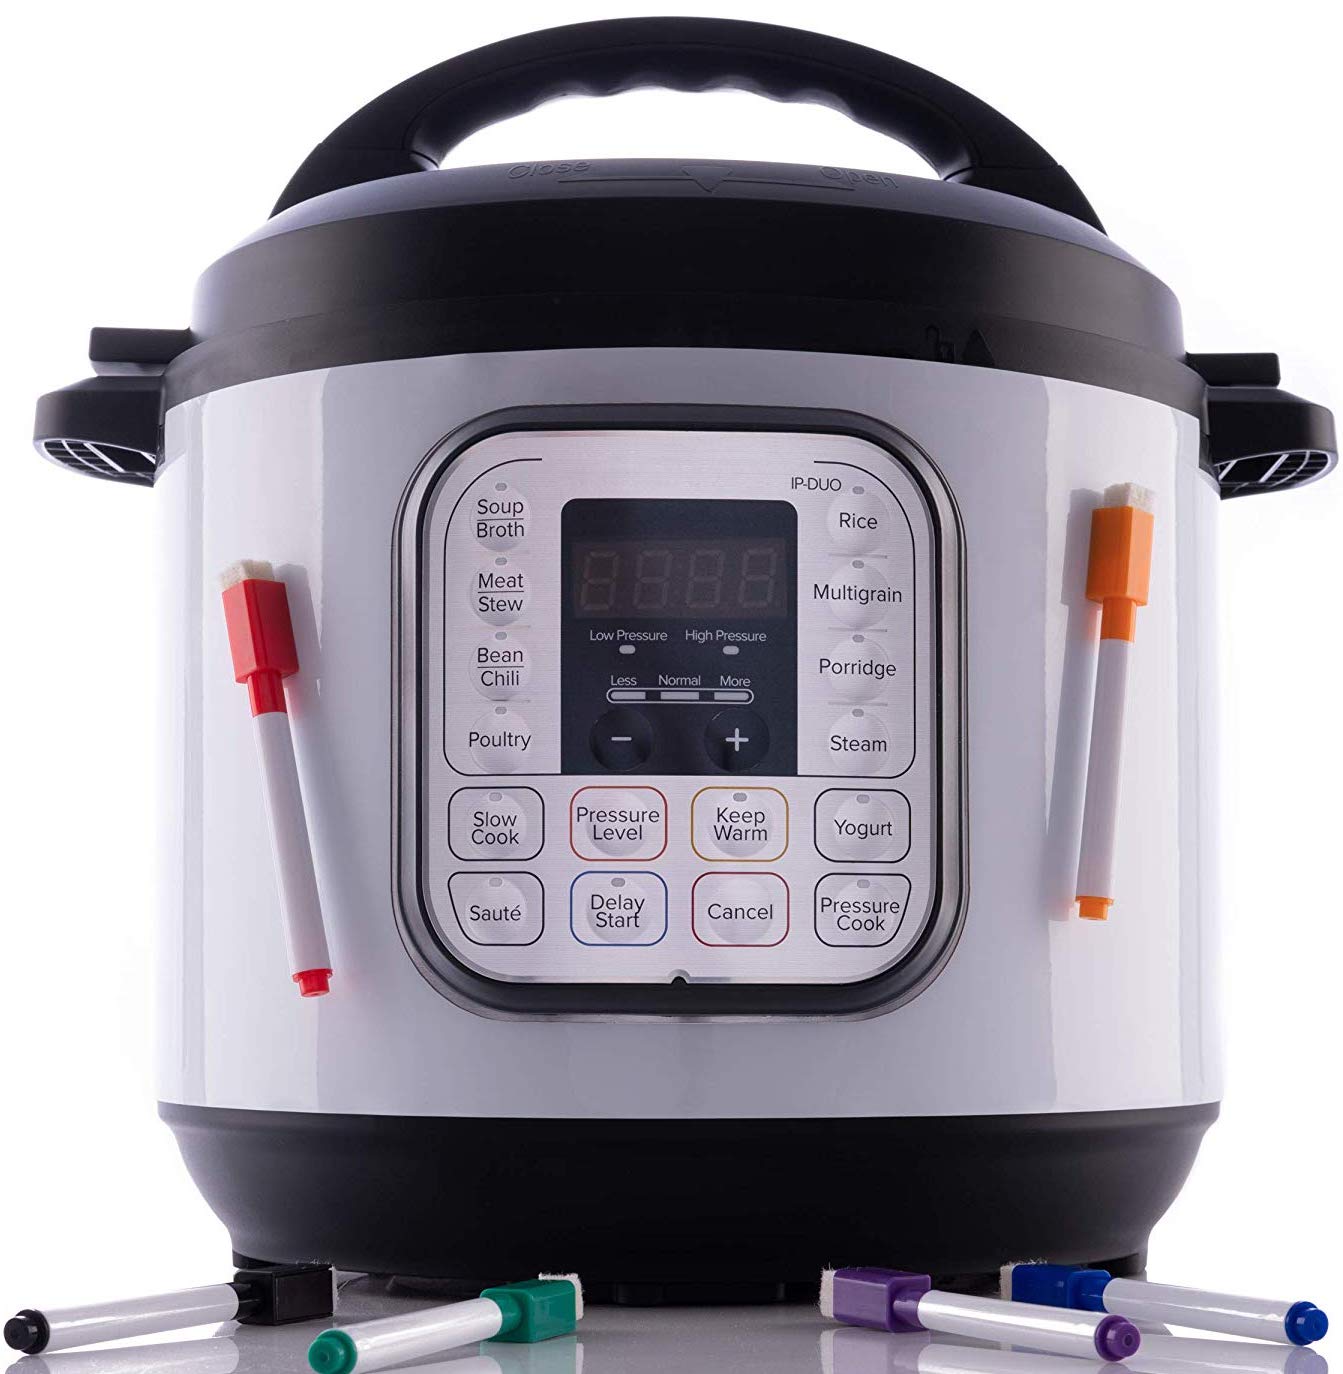 Instant Pot covered in a magnetic whiteboard cover with magnetic dry erase markers